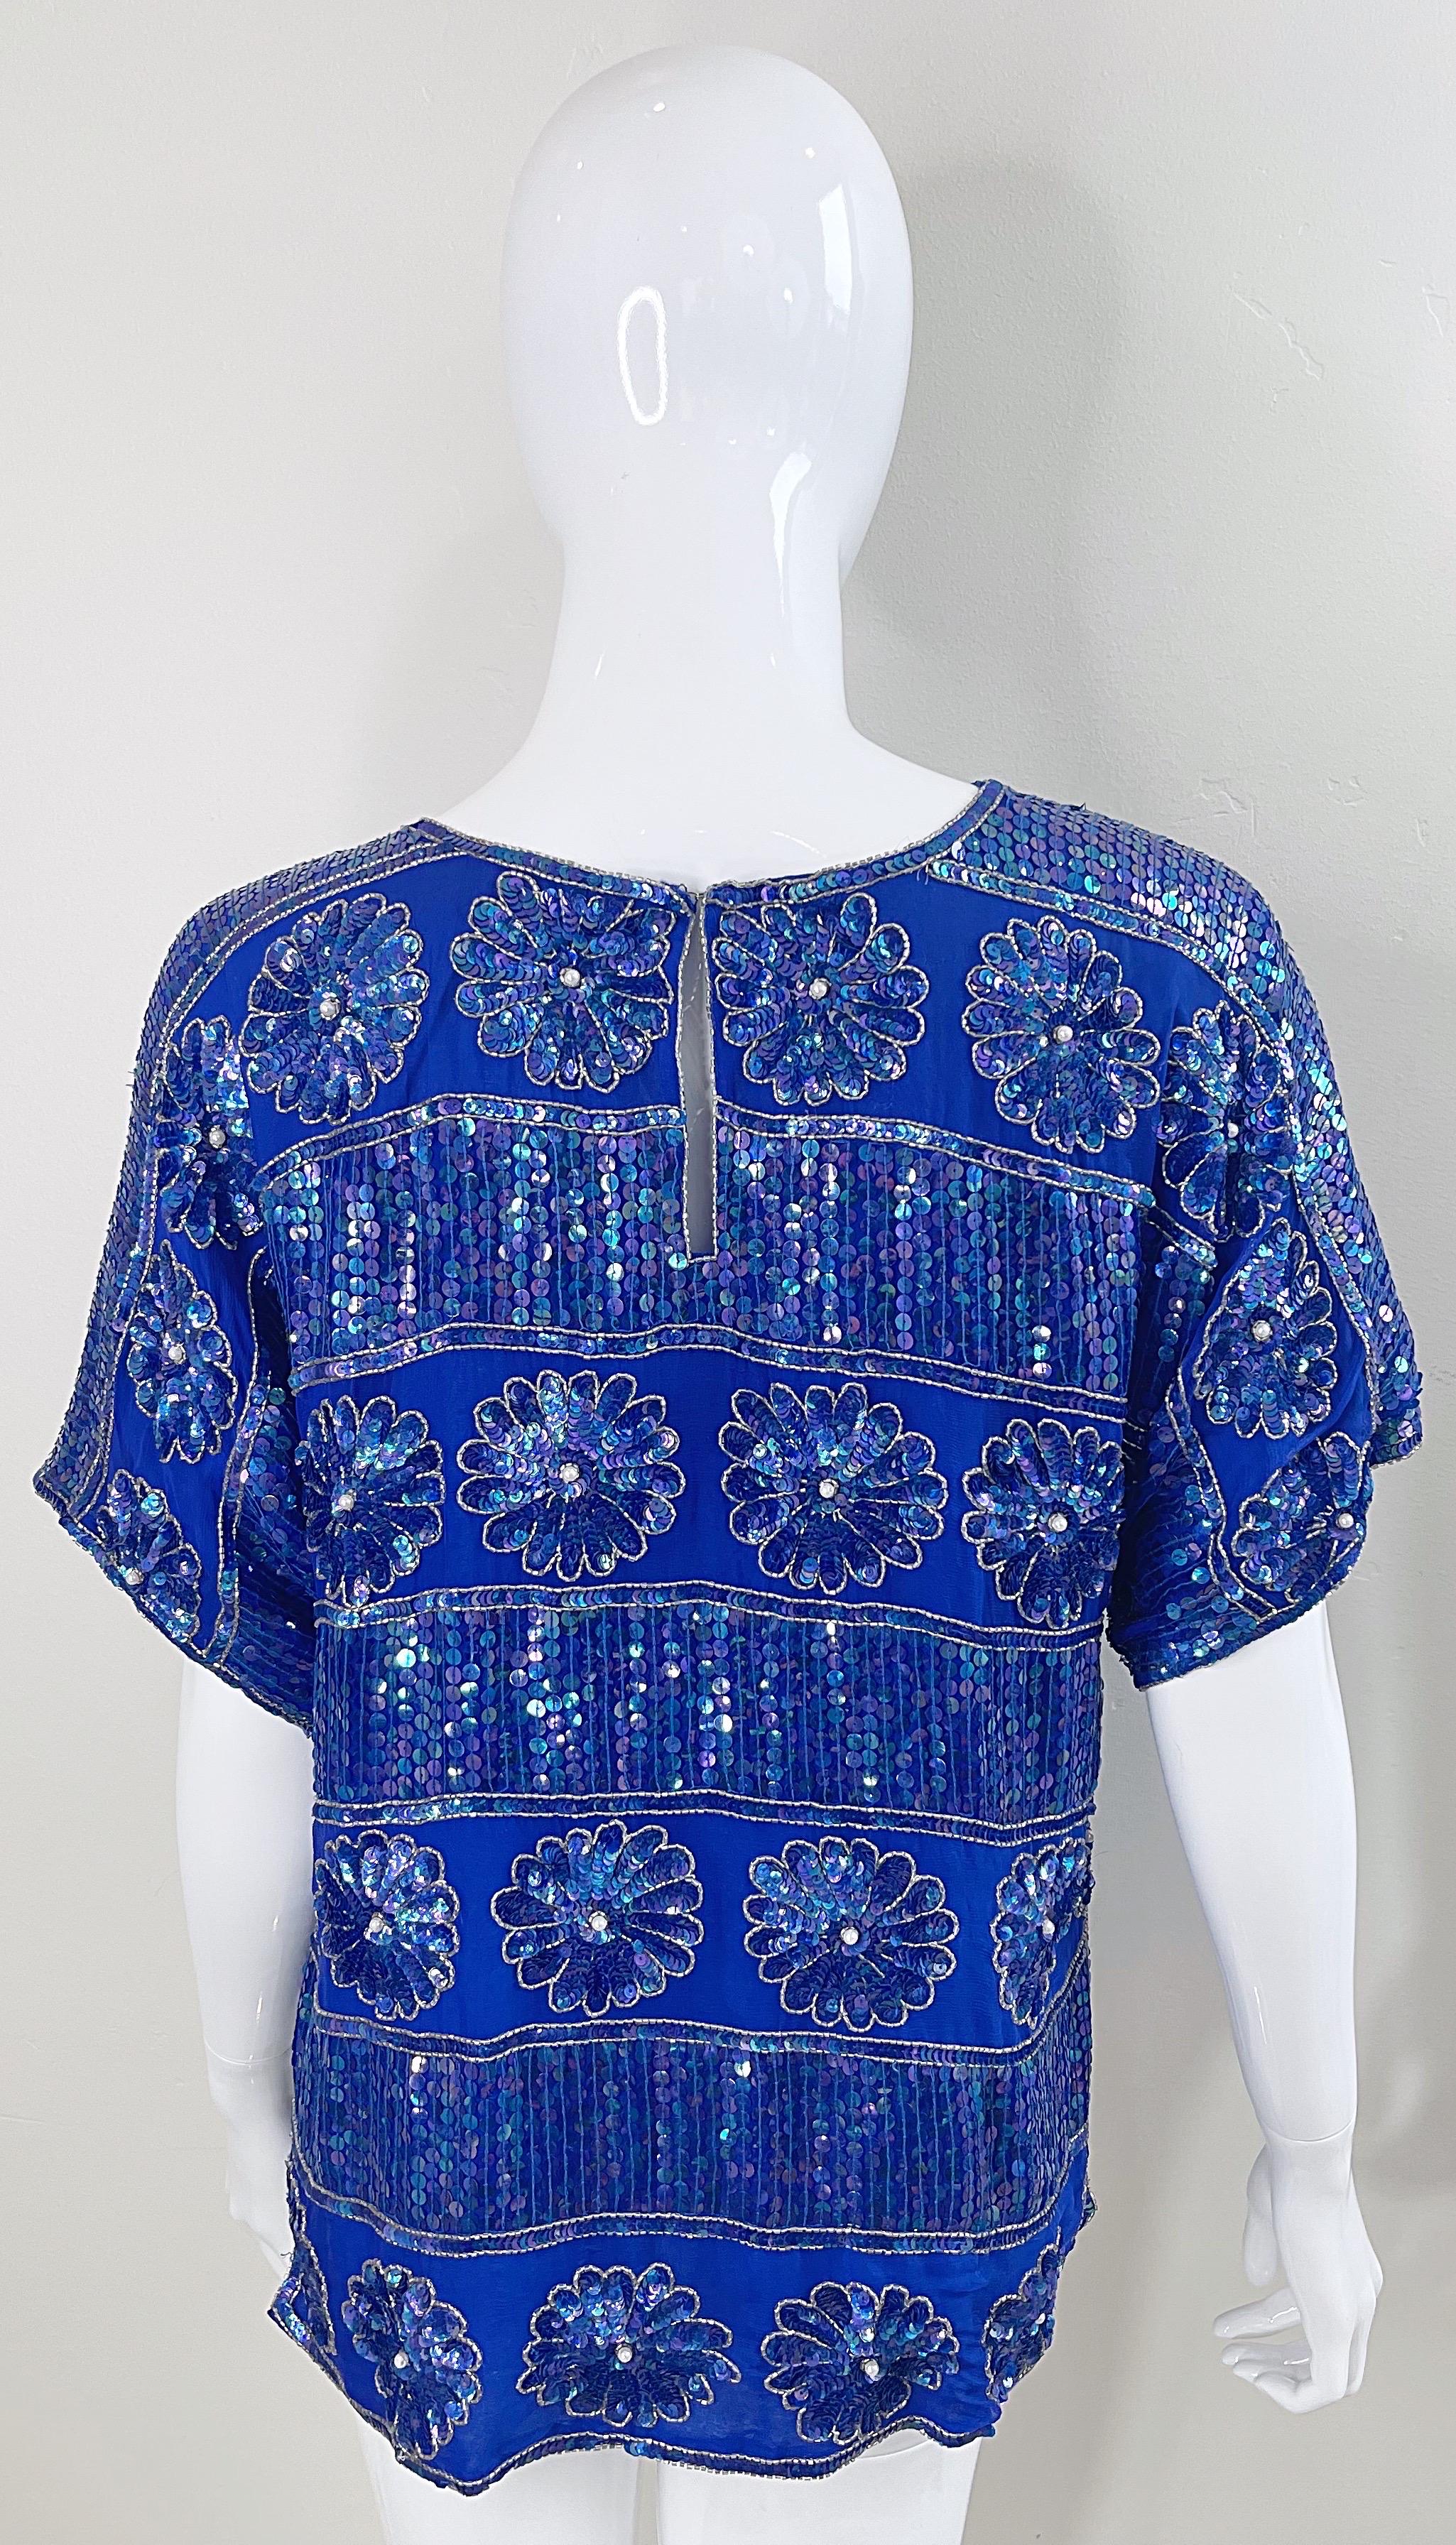 1980s Royal Blue Silk Chiffon Sequin Beaded Pearl Vintage 80s Blouse Shirt Top For Sale 4